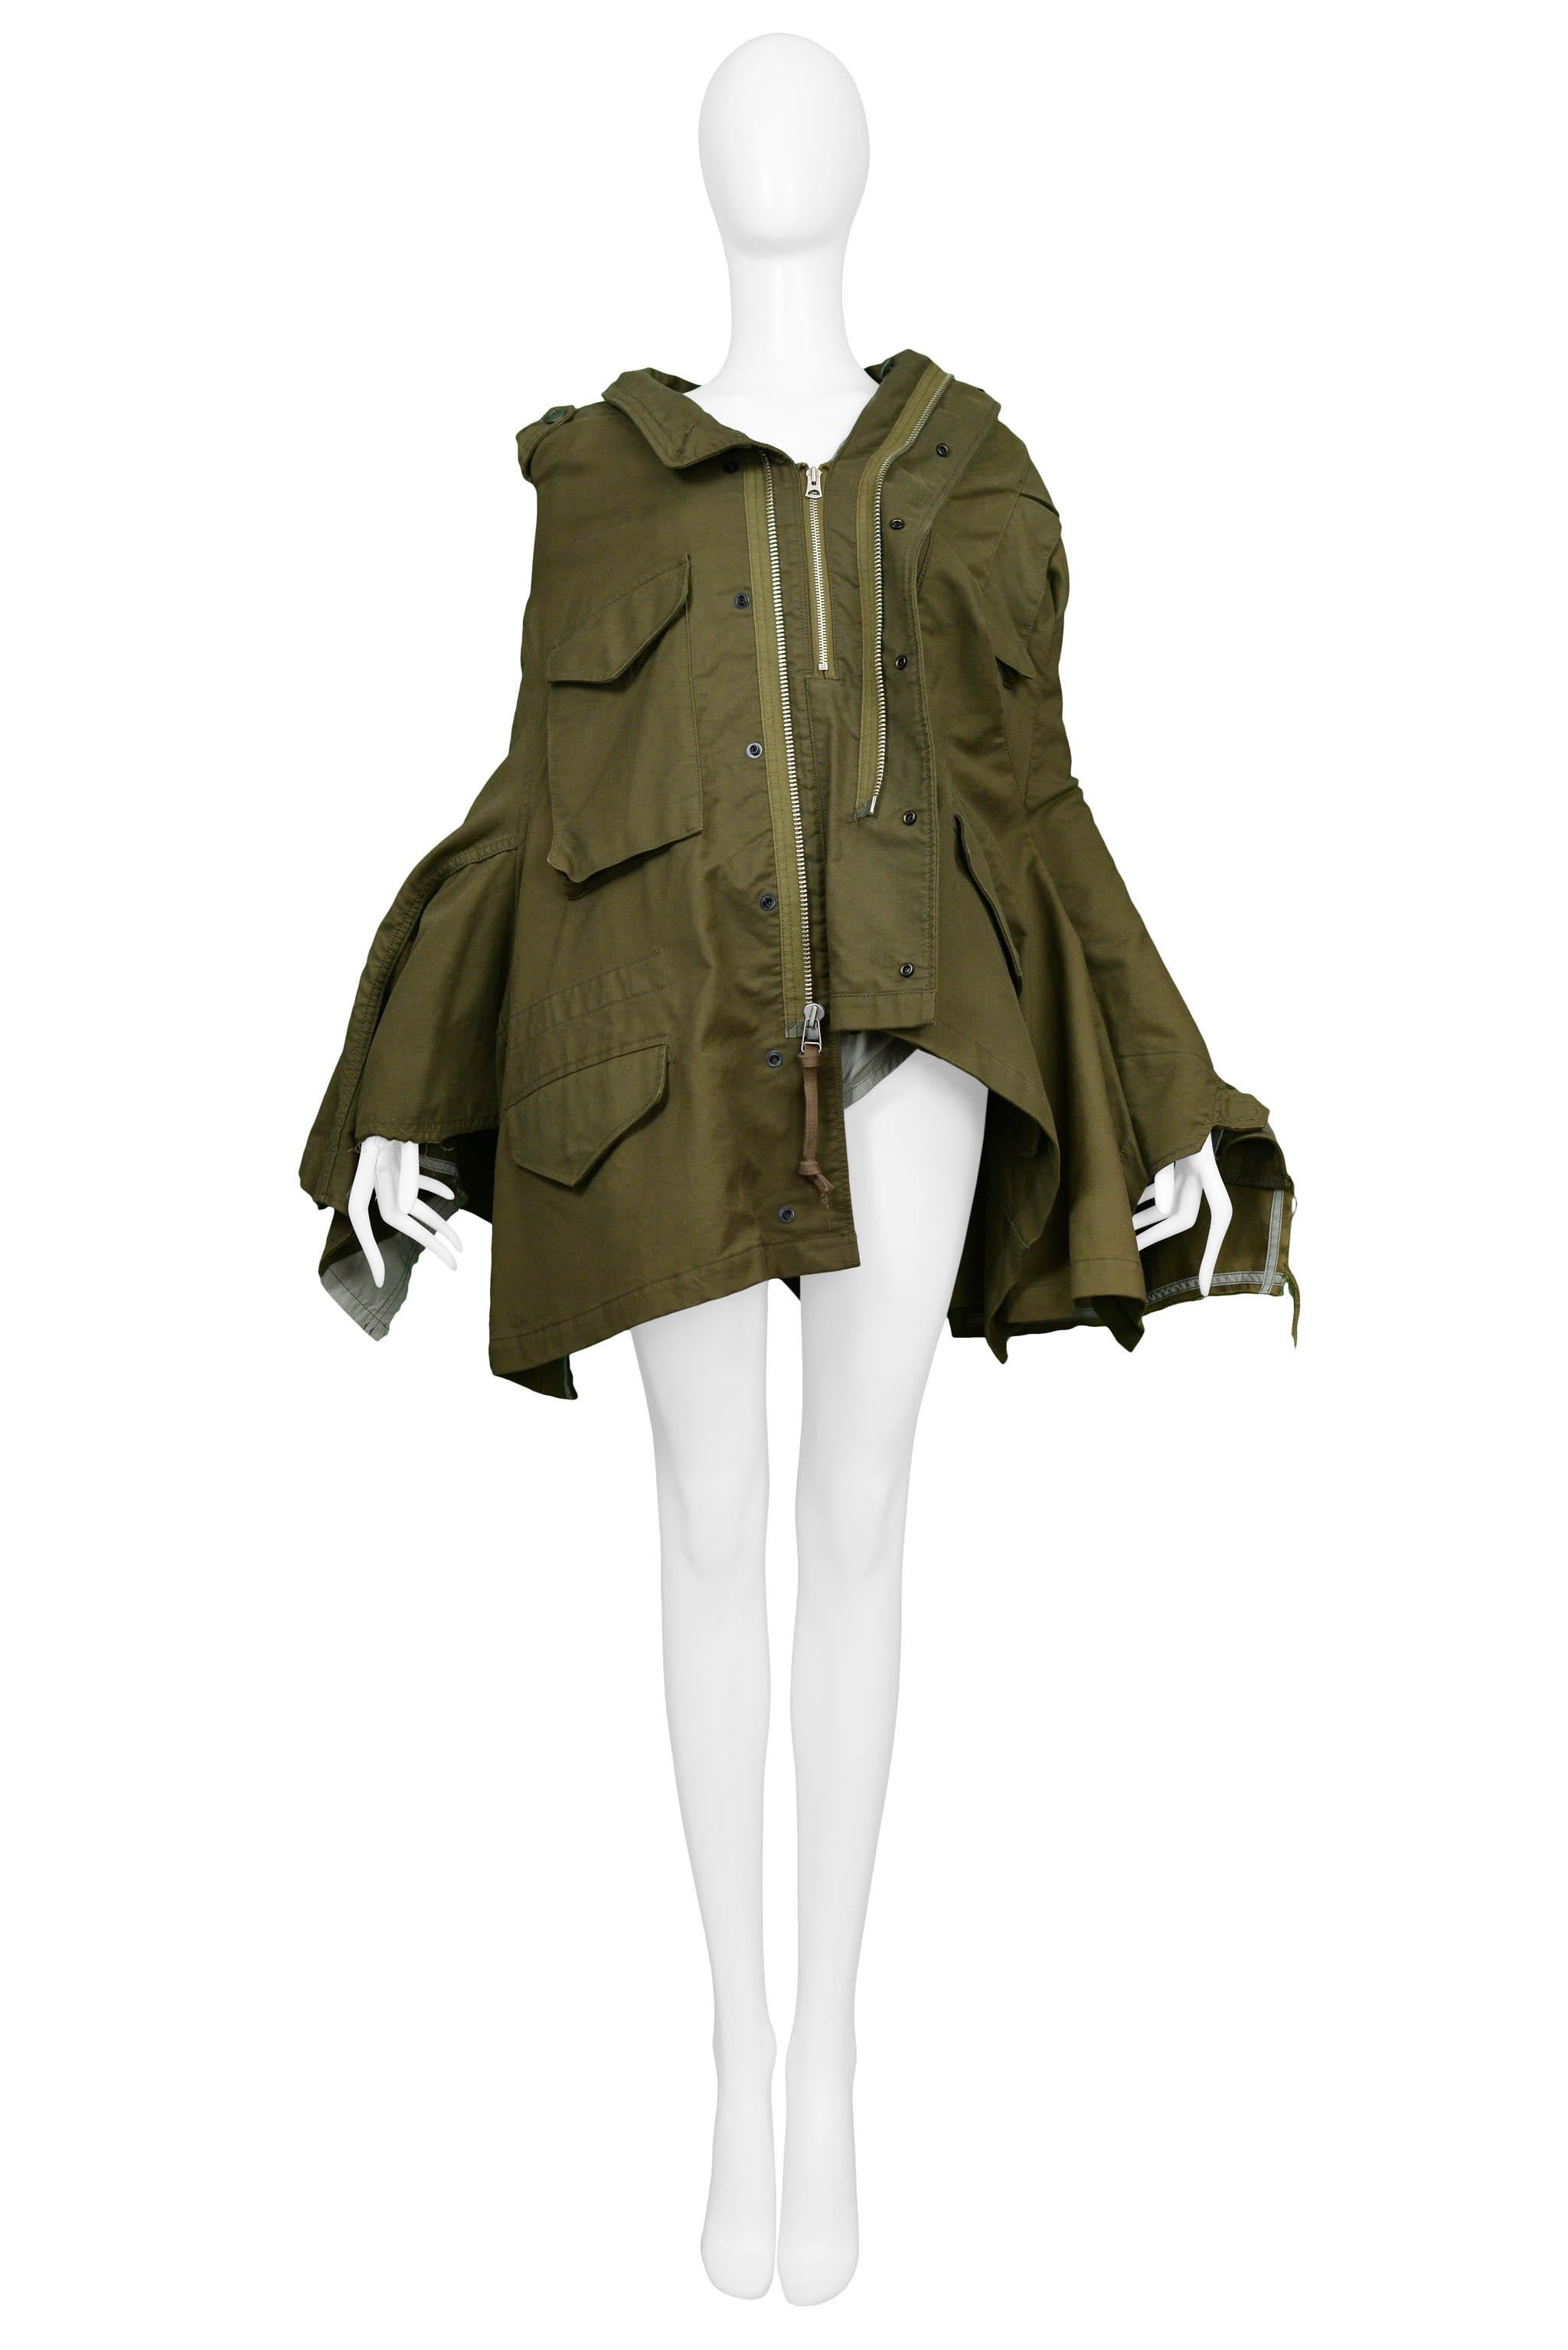 Resurrection Vintage is excited to offer a vintage Junya Watanabe for Comme Des Garcons army green deconstructed military-inspired cape featuring an asymmetrical hem, patch pockets, and zipper accents. 

Junya Watanabe
Size: S/M
Measurements: